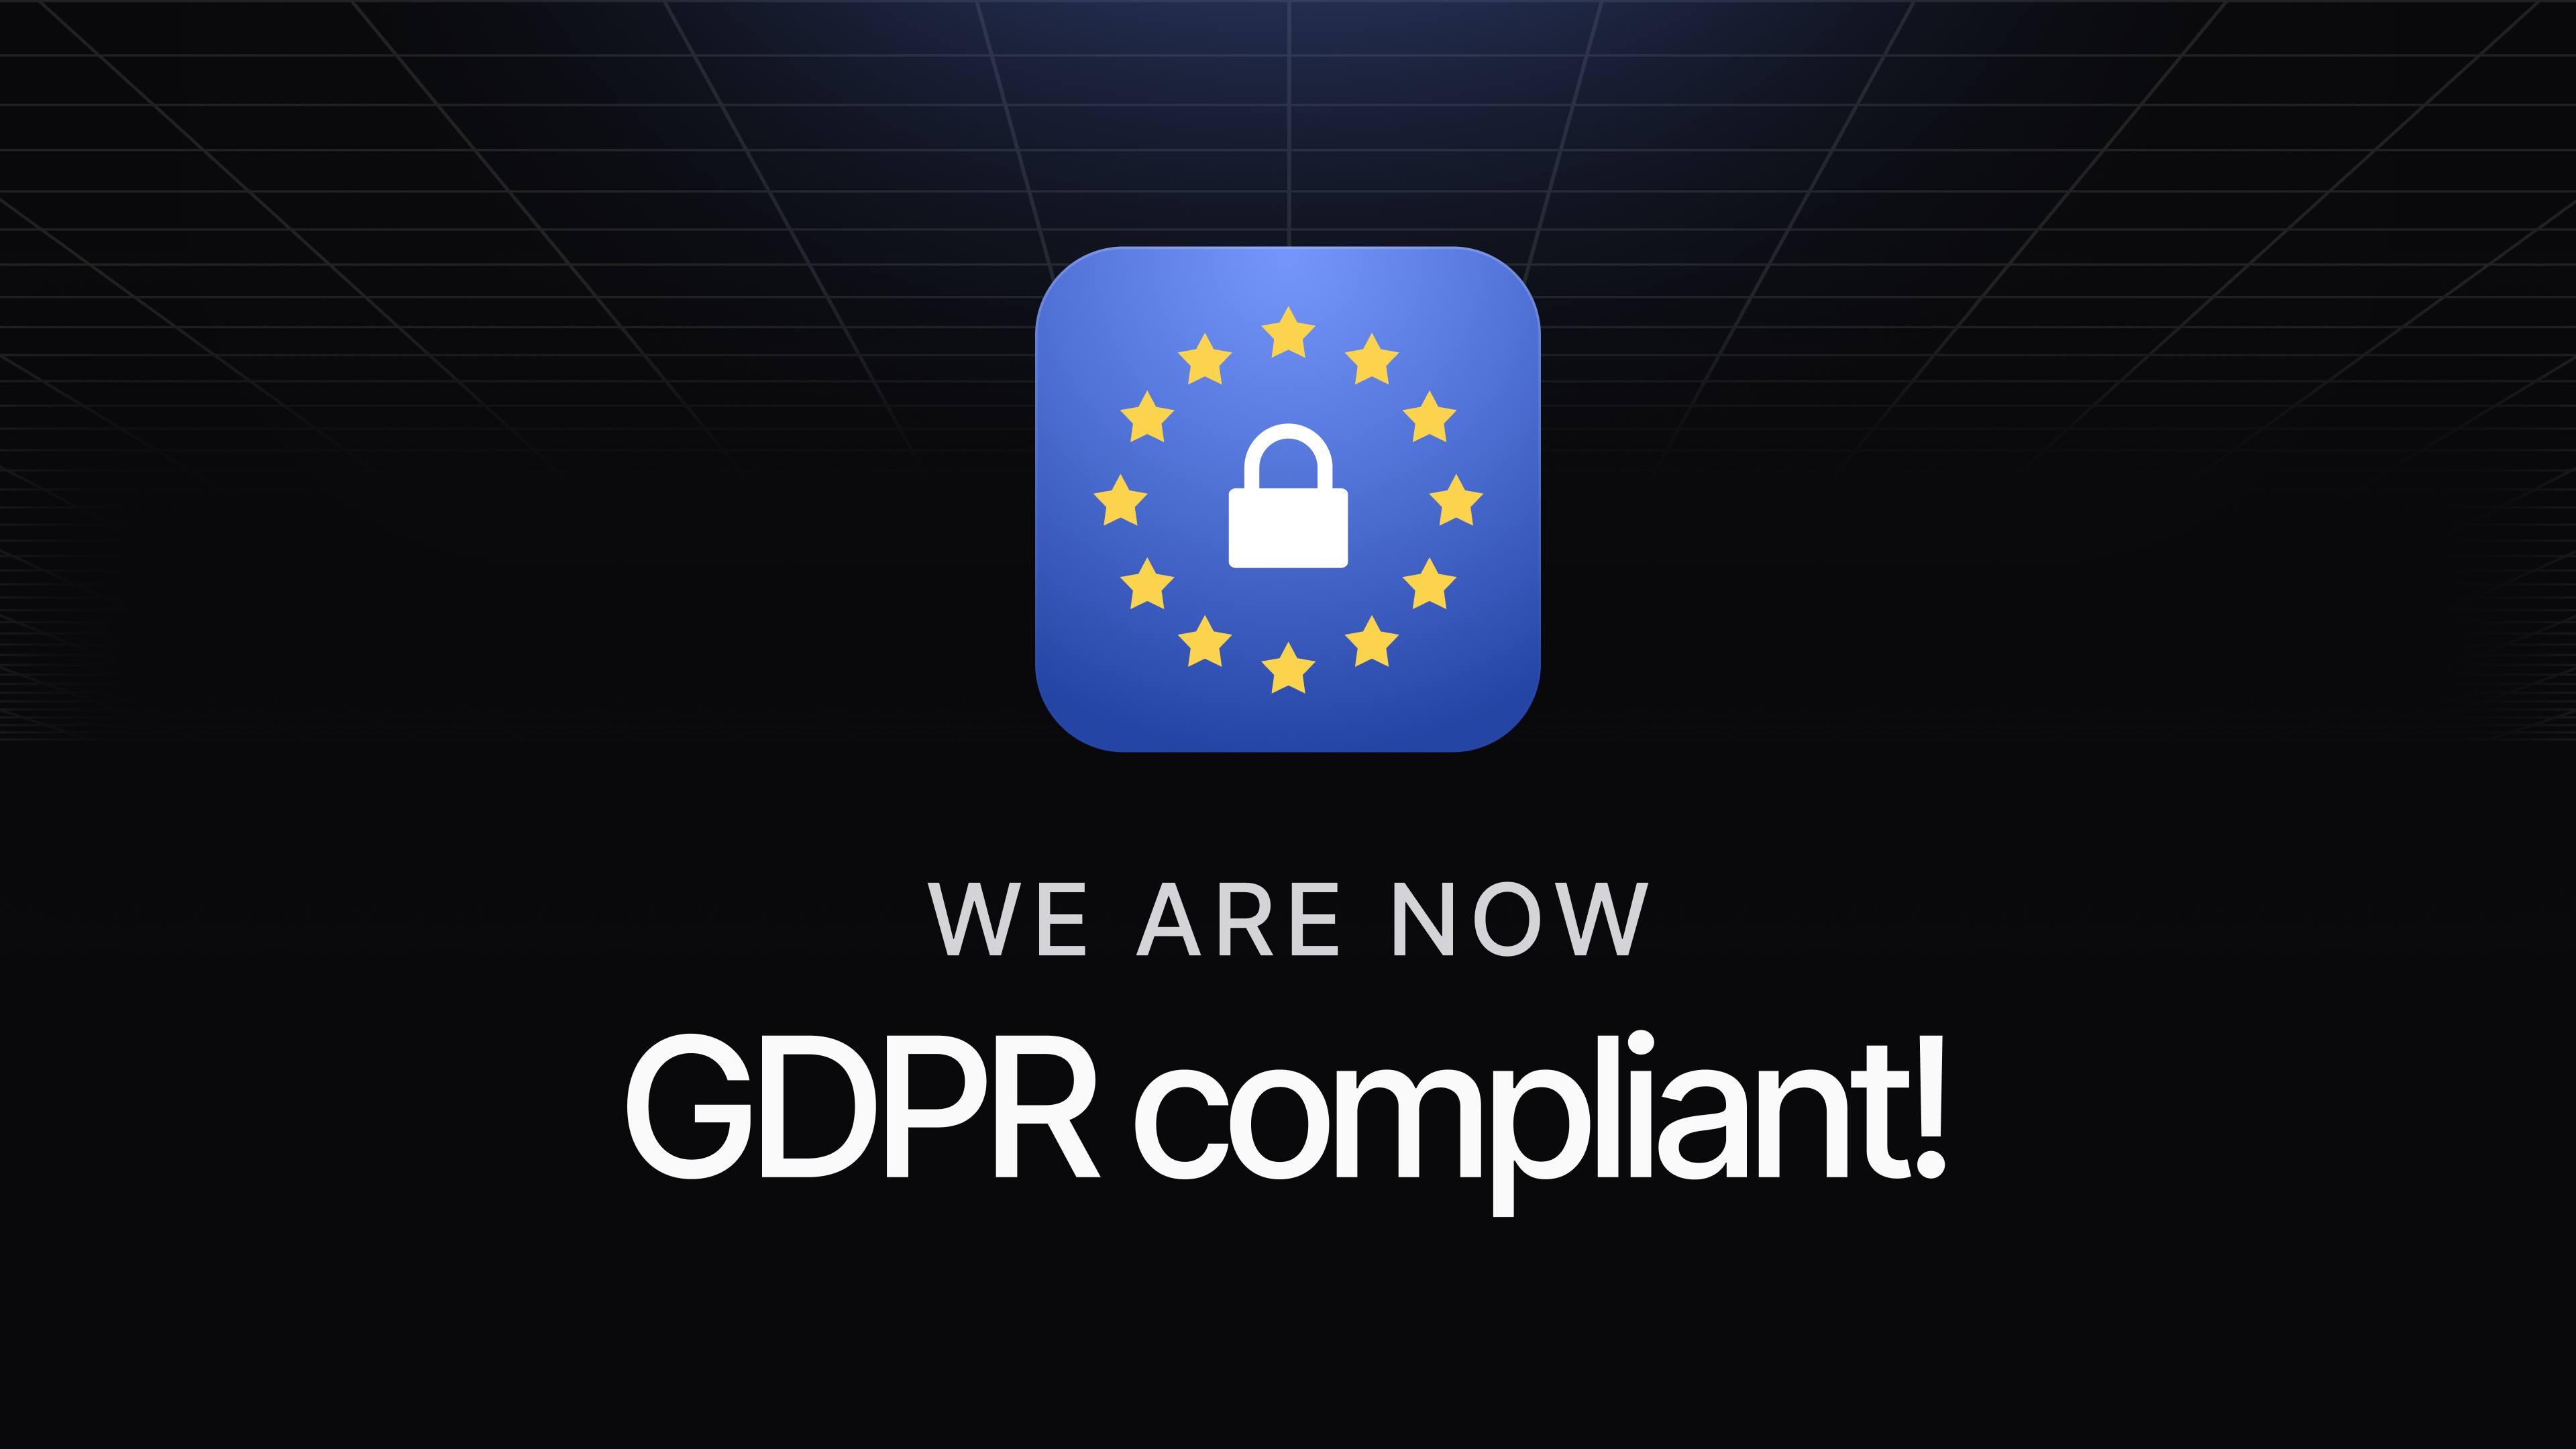 Chatbase is now GDPR compliant